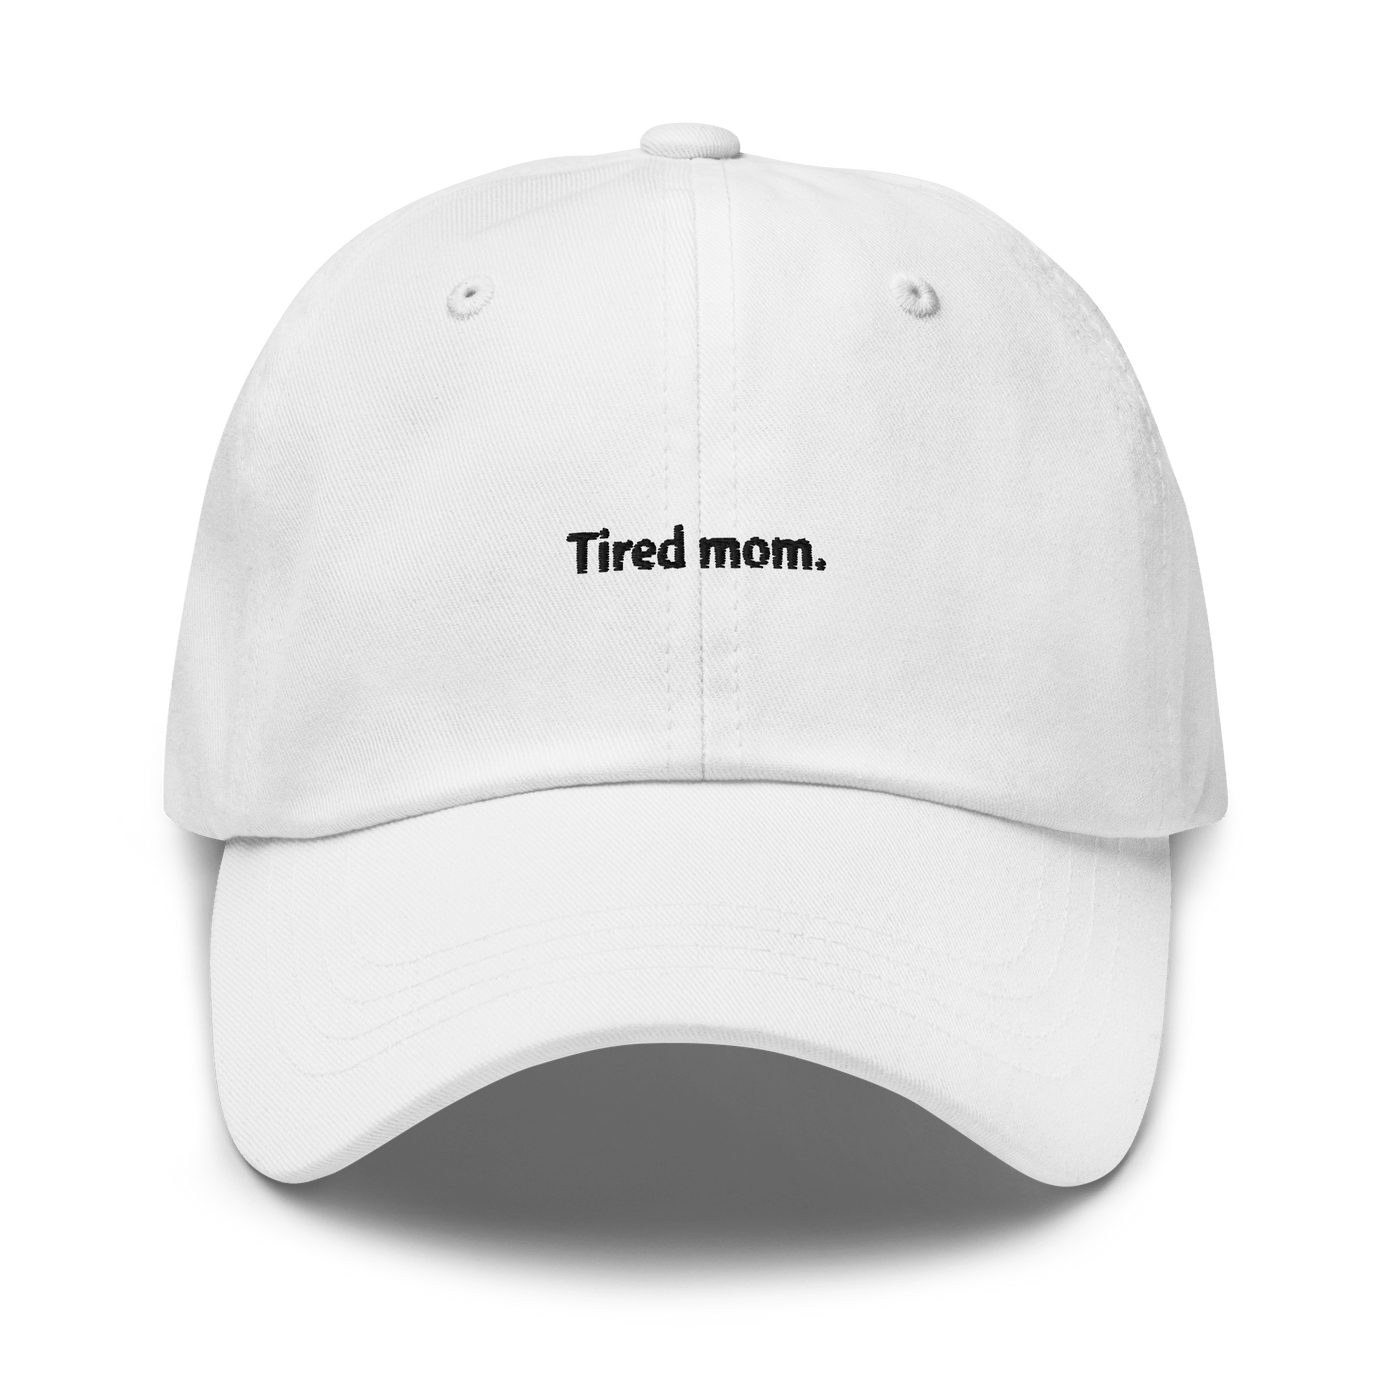 Tired mom Dad hat - White - - Just Another Cap Store